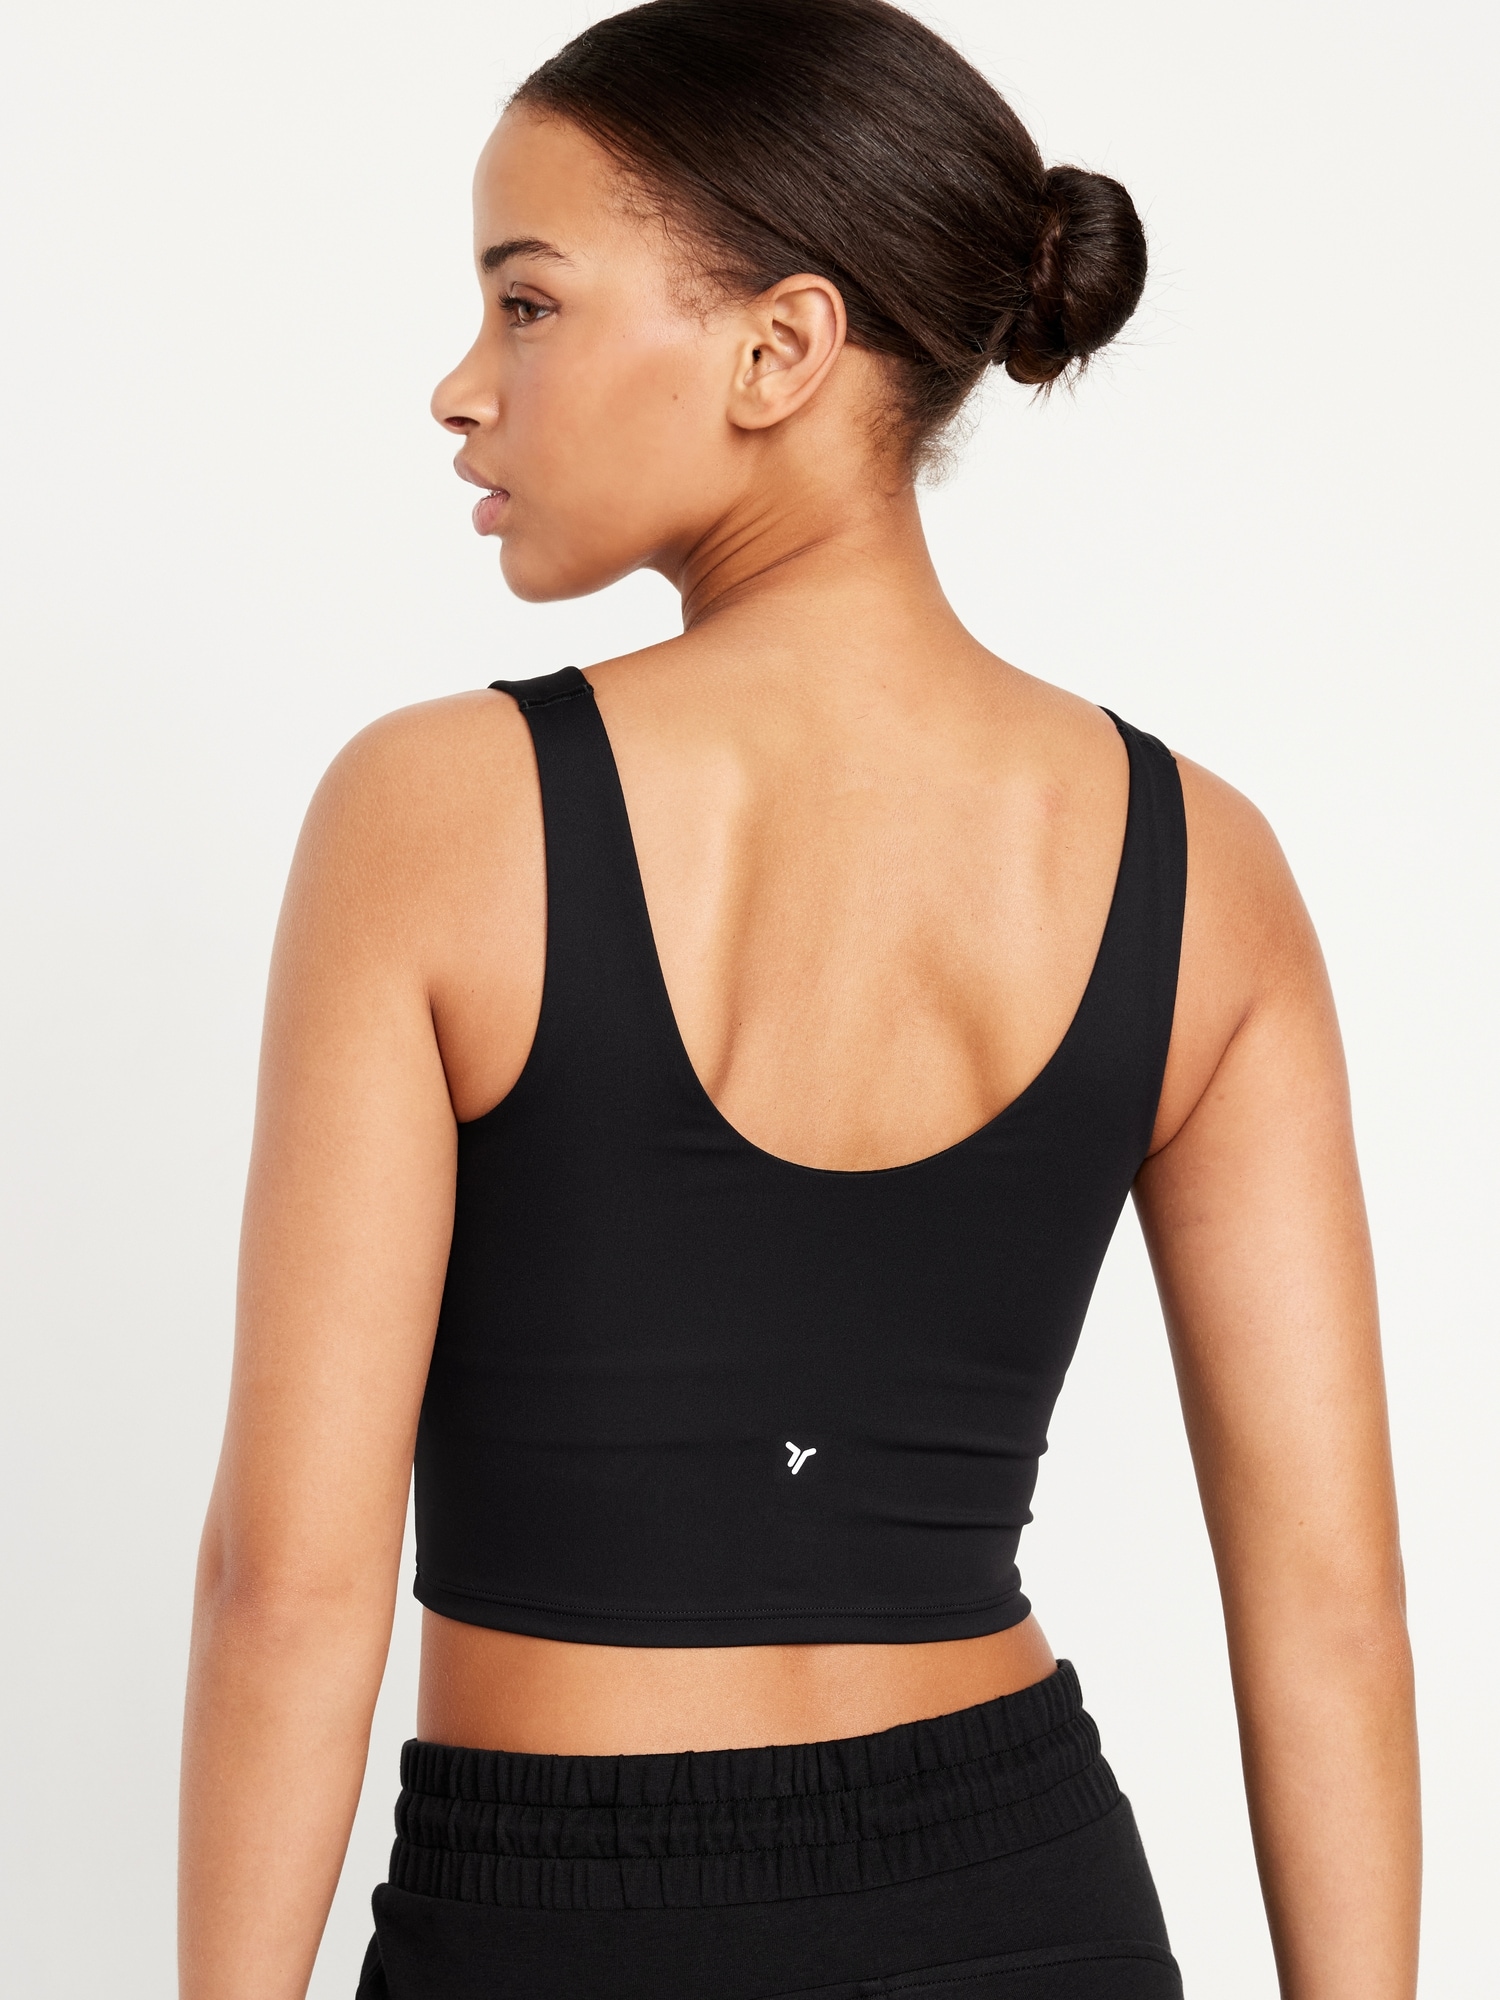 Vintage Ladies Inner Shoppe - Seamed non-padded sports bra with high  neckline for superior coverage. Double lined cups for greater sweat  absorption. Broad back with broad elastic band for superb support. Thin